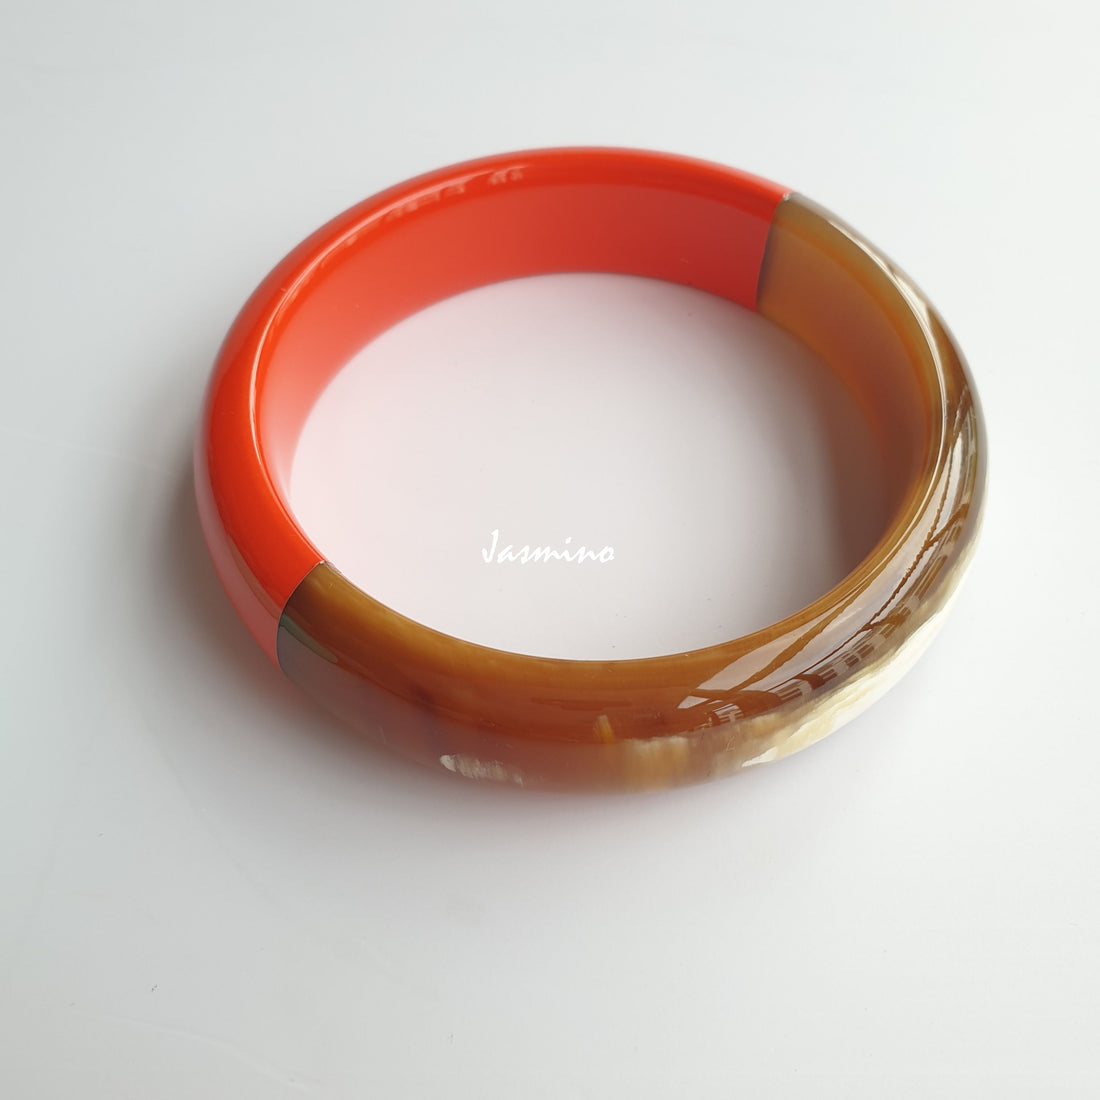 unique handmade Vintage thin bangle bracelet features a brown half and an orange half made of natural buffalo horn for women on Thanksgiving